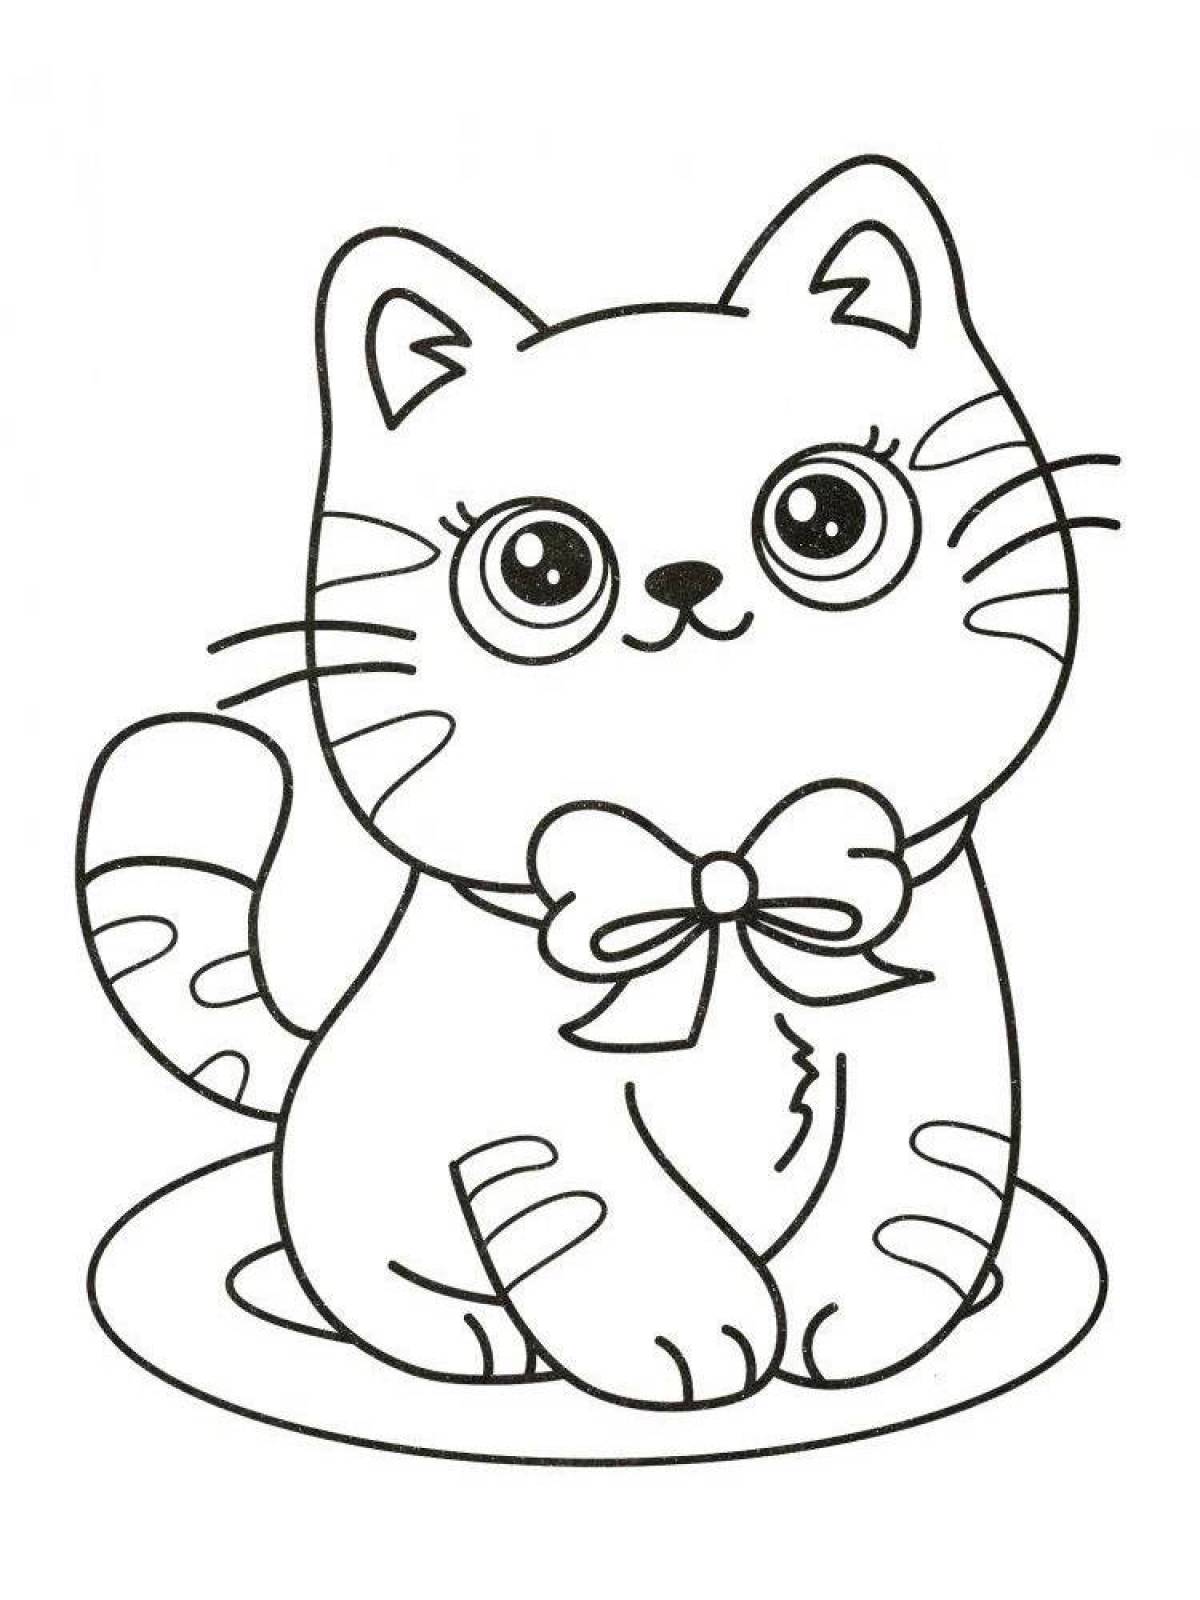 Cute cat coloring book for kids 3-4 years old